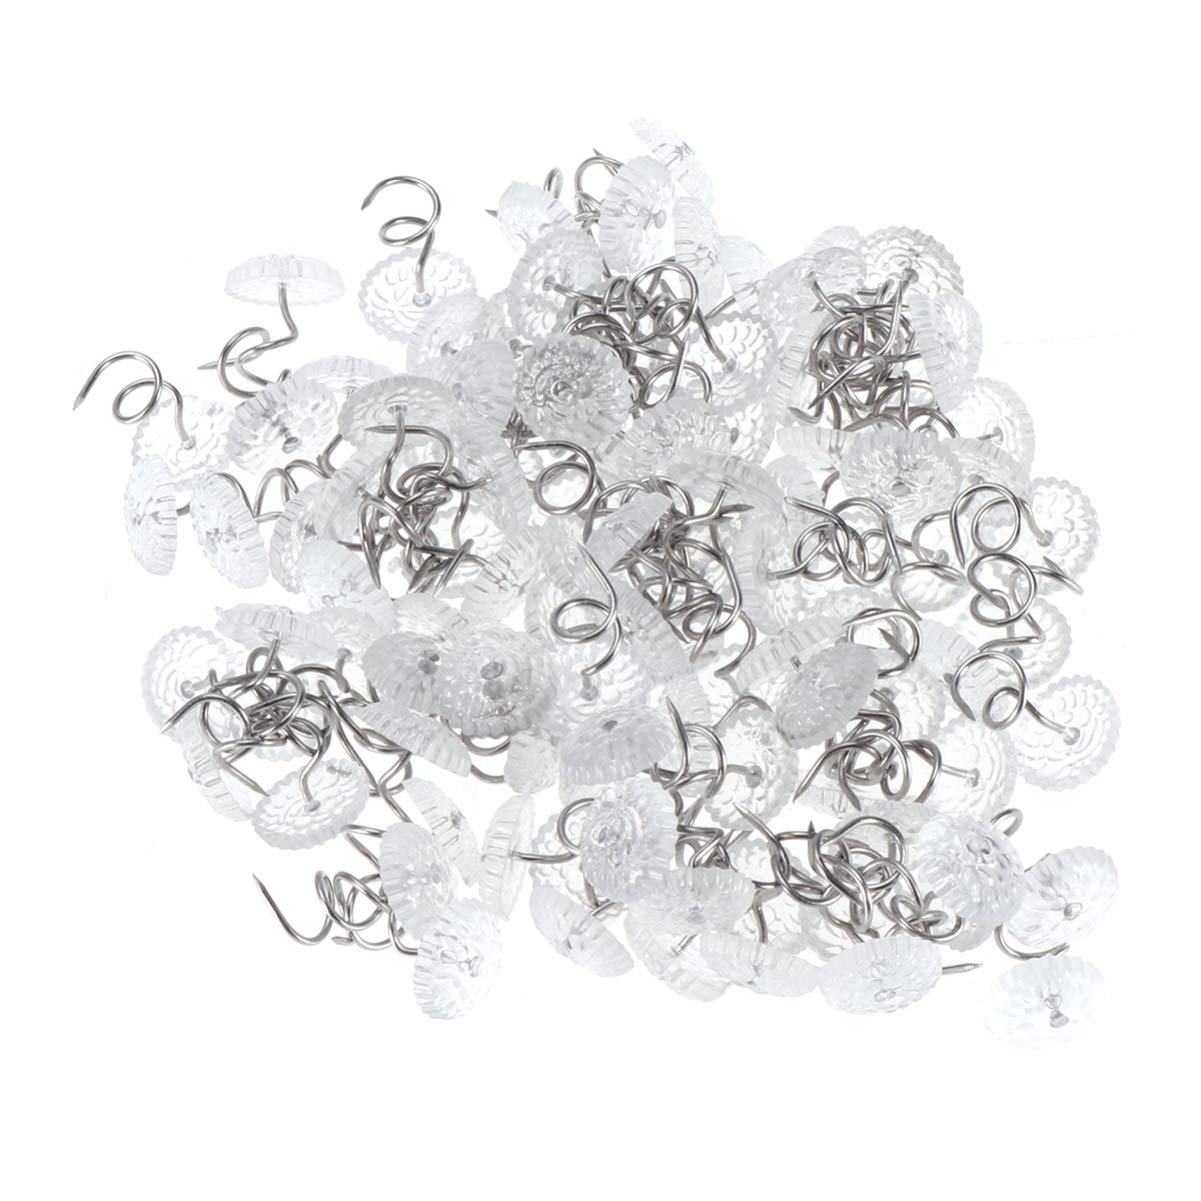 Artibetter 100Pcs Twist pins bed sheet clip fixer clear heads for hold slipcovers